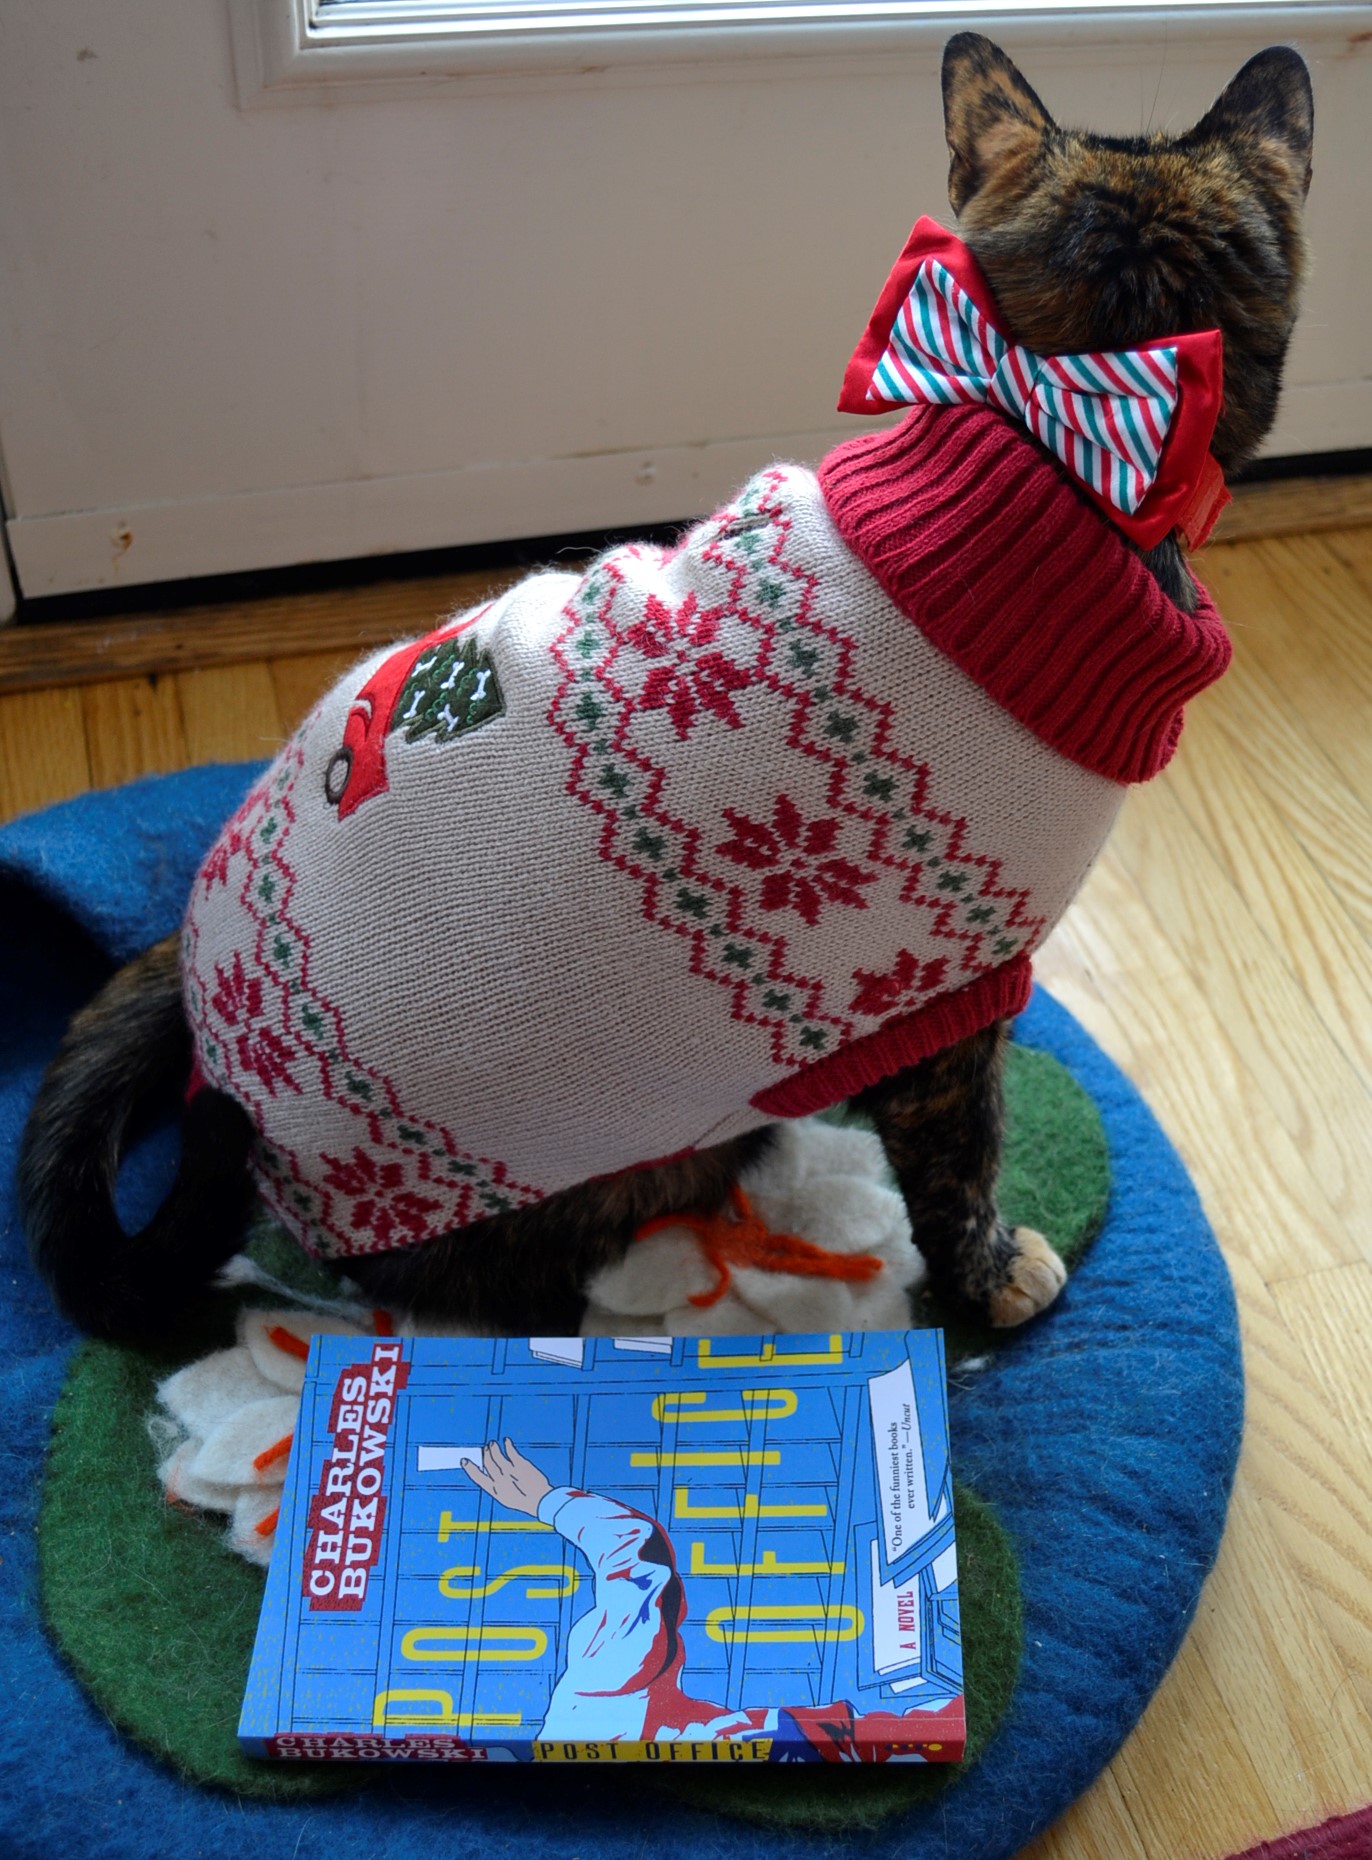 A cat in a weater and bow looks out a window. Beside her, a copy of Post Office with a blue cover sits on the ground.